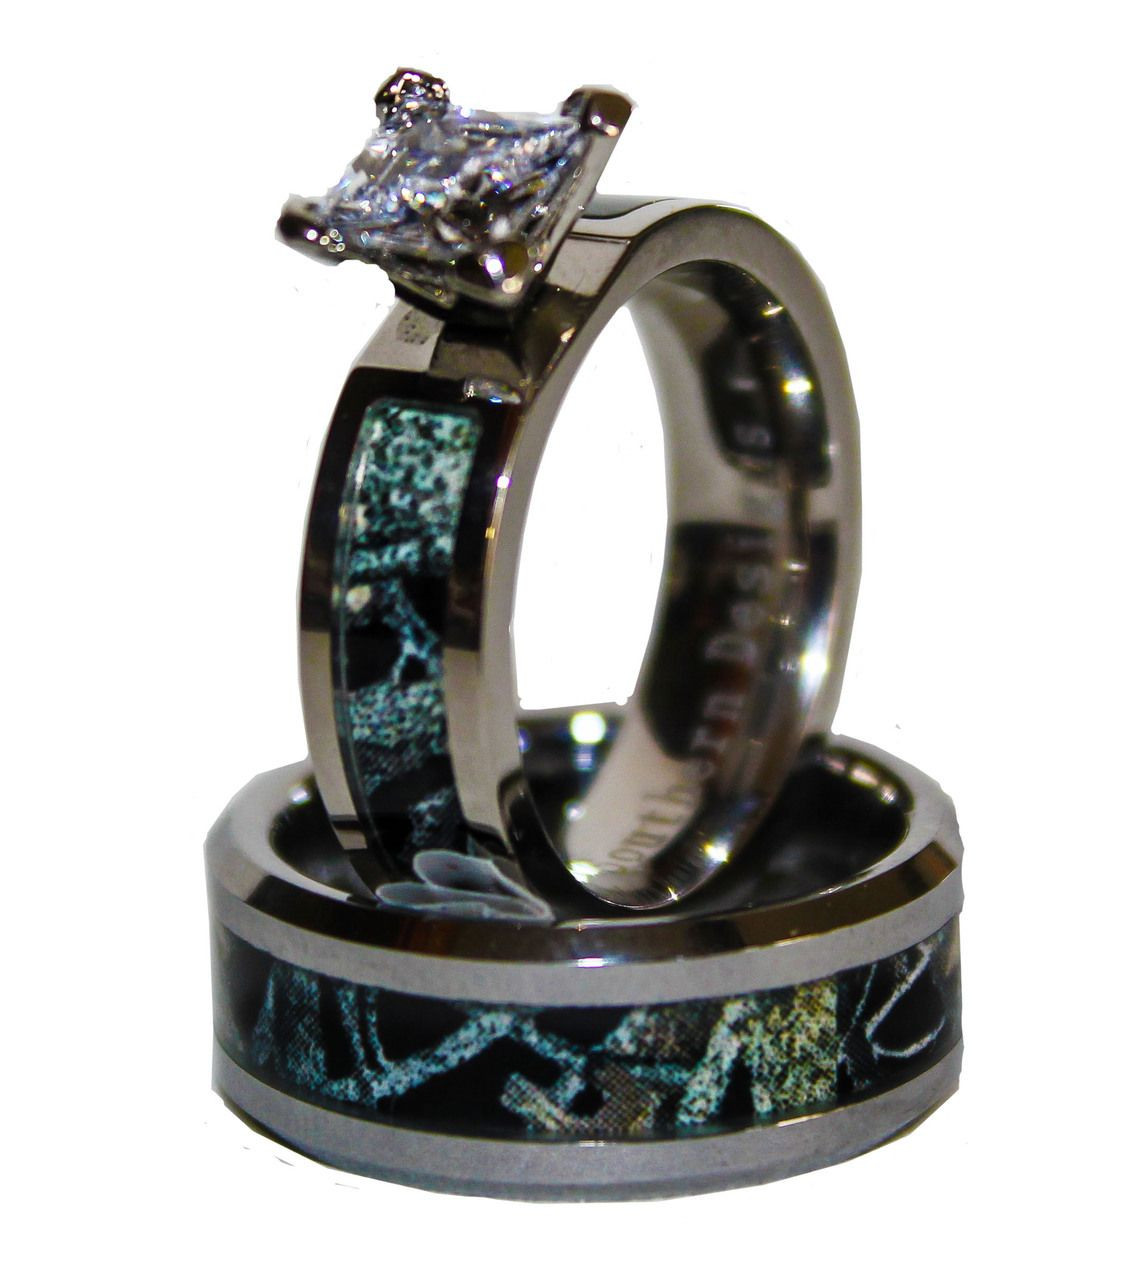 Camouflage Wedding Ring Sets
 Black Camo on Silver Band Couples Ring Set With Stone